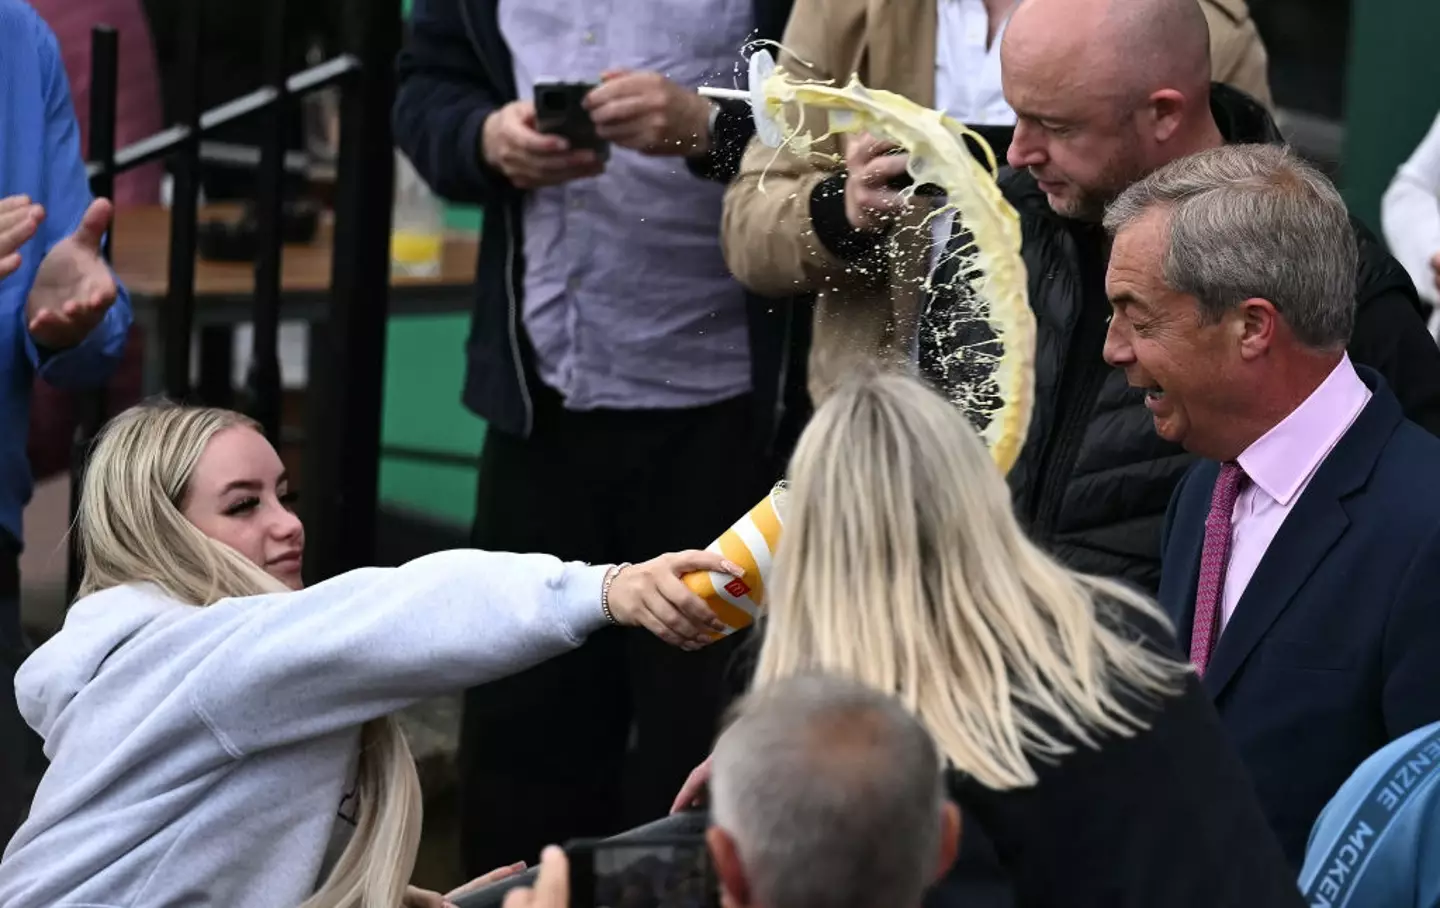 She caught him off guard and people loved it.  (BEN STANSALL/AFP via Getty Images)